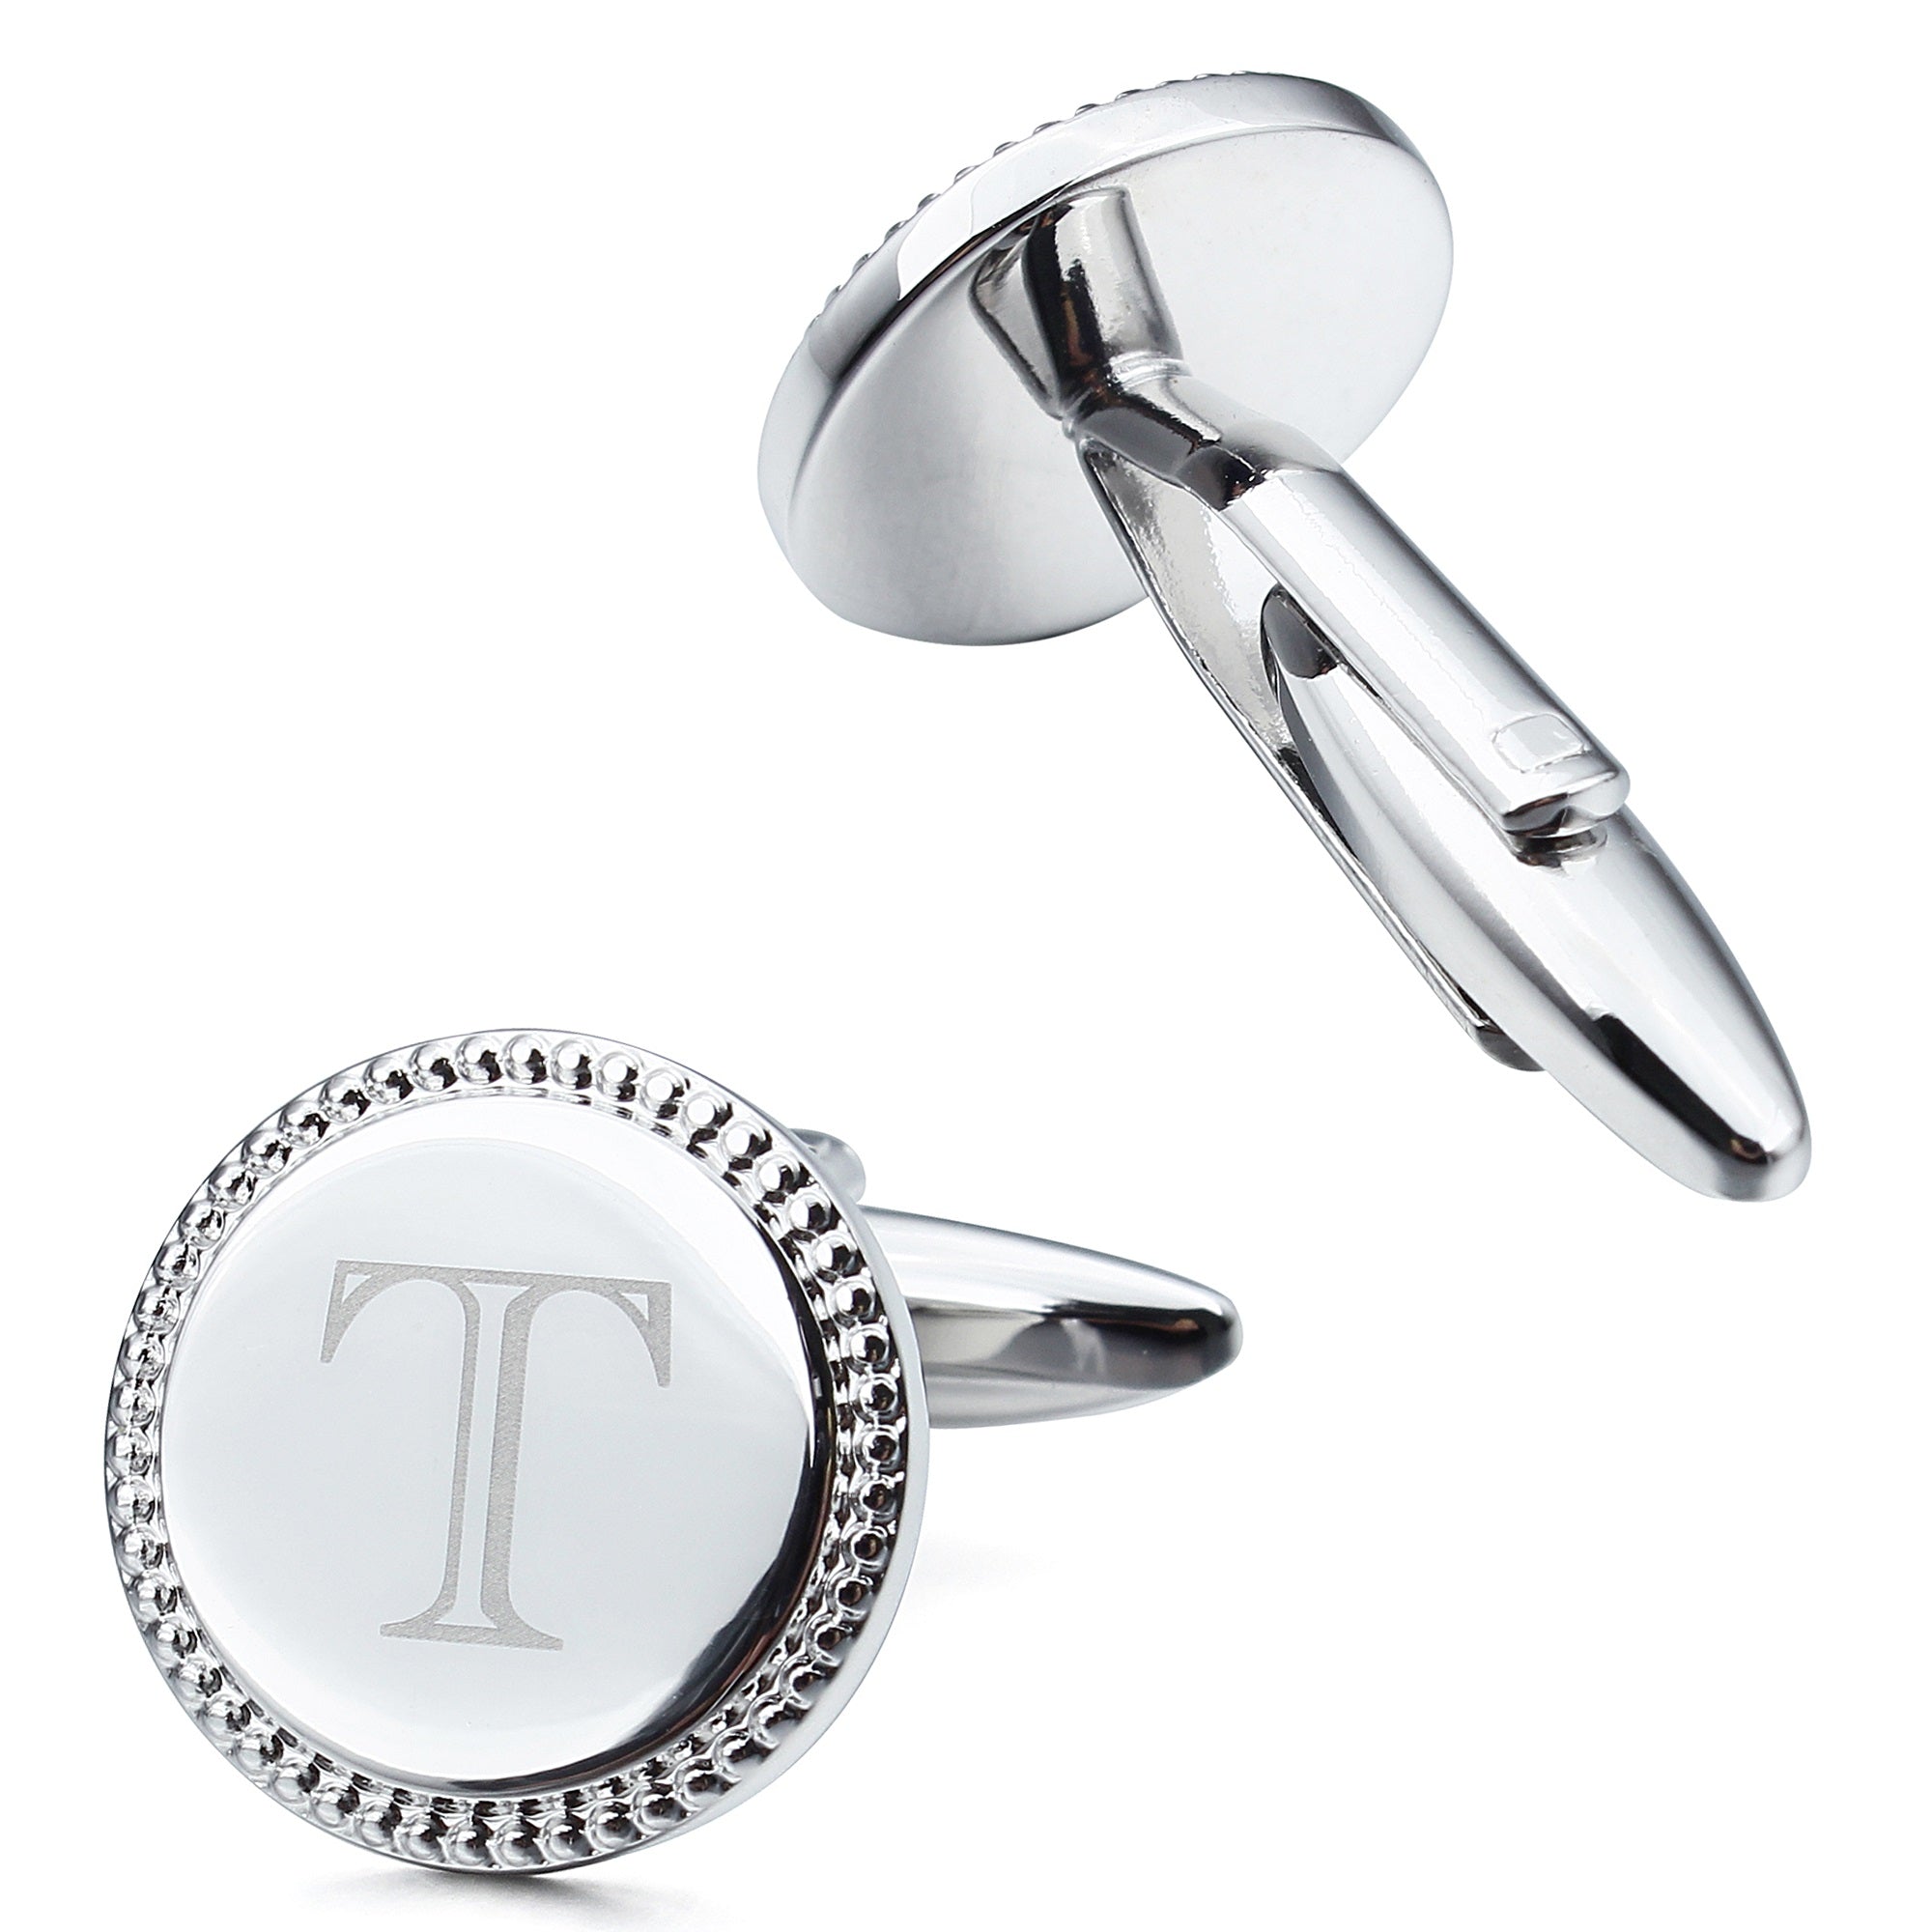 Letter T Initial Cufflinks -Round